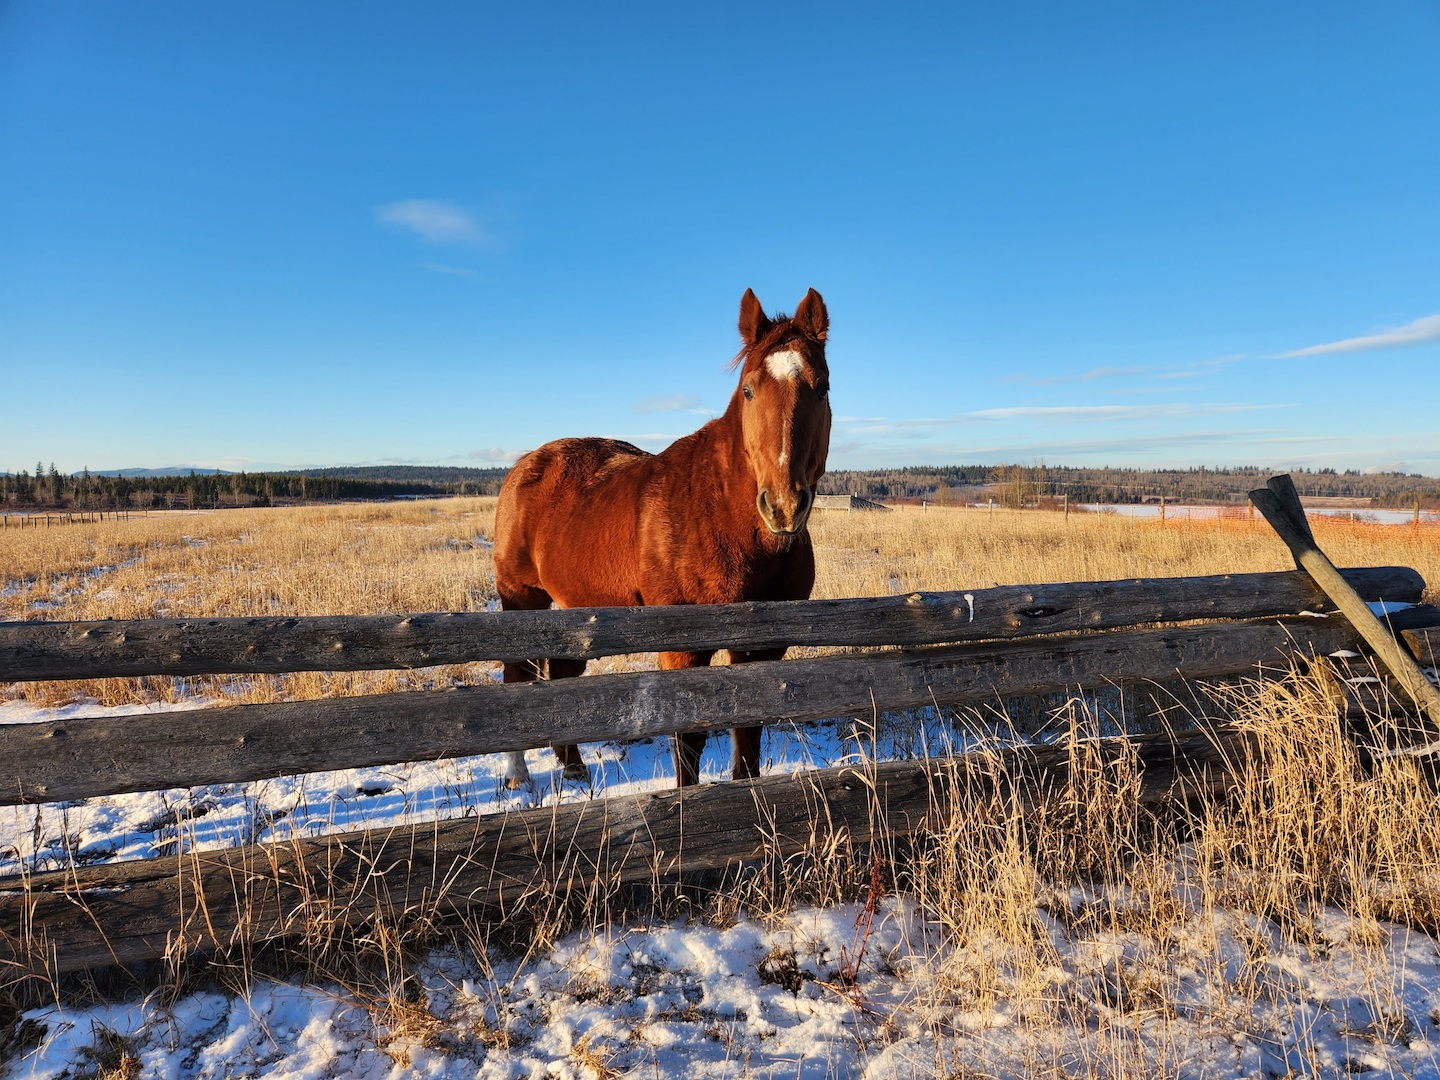 sorrel quarter horse looking over a wooden ranch fence, with some snow in the foreground and a sunny field in the back